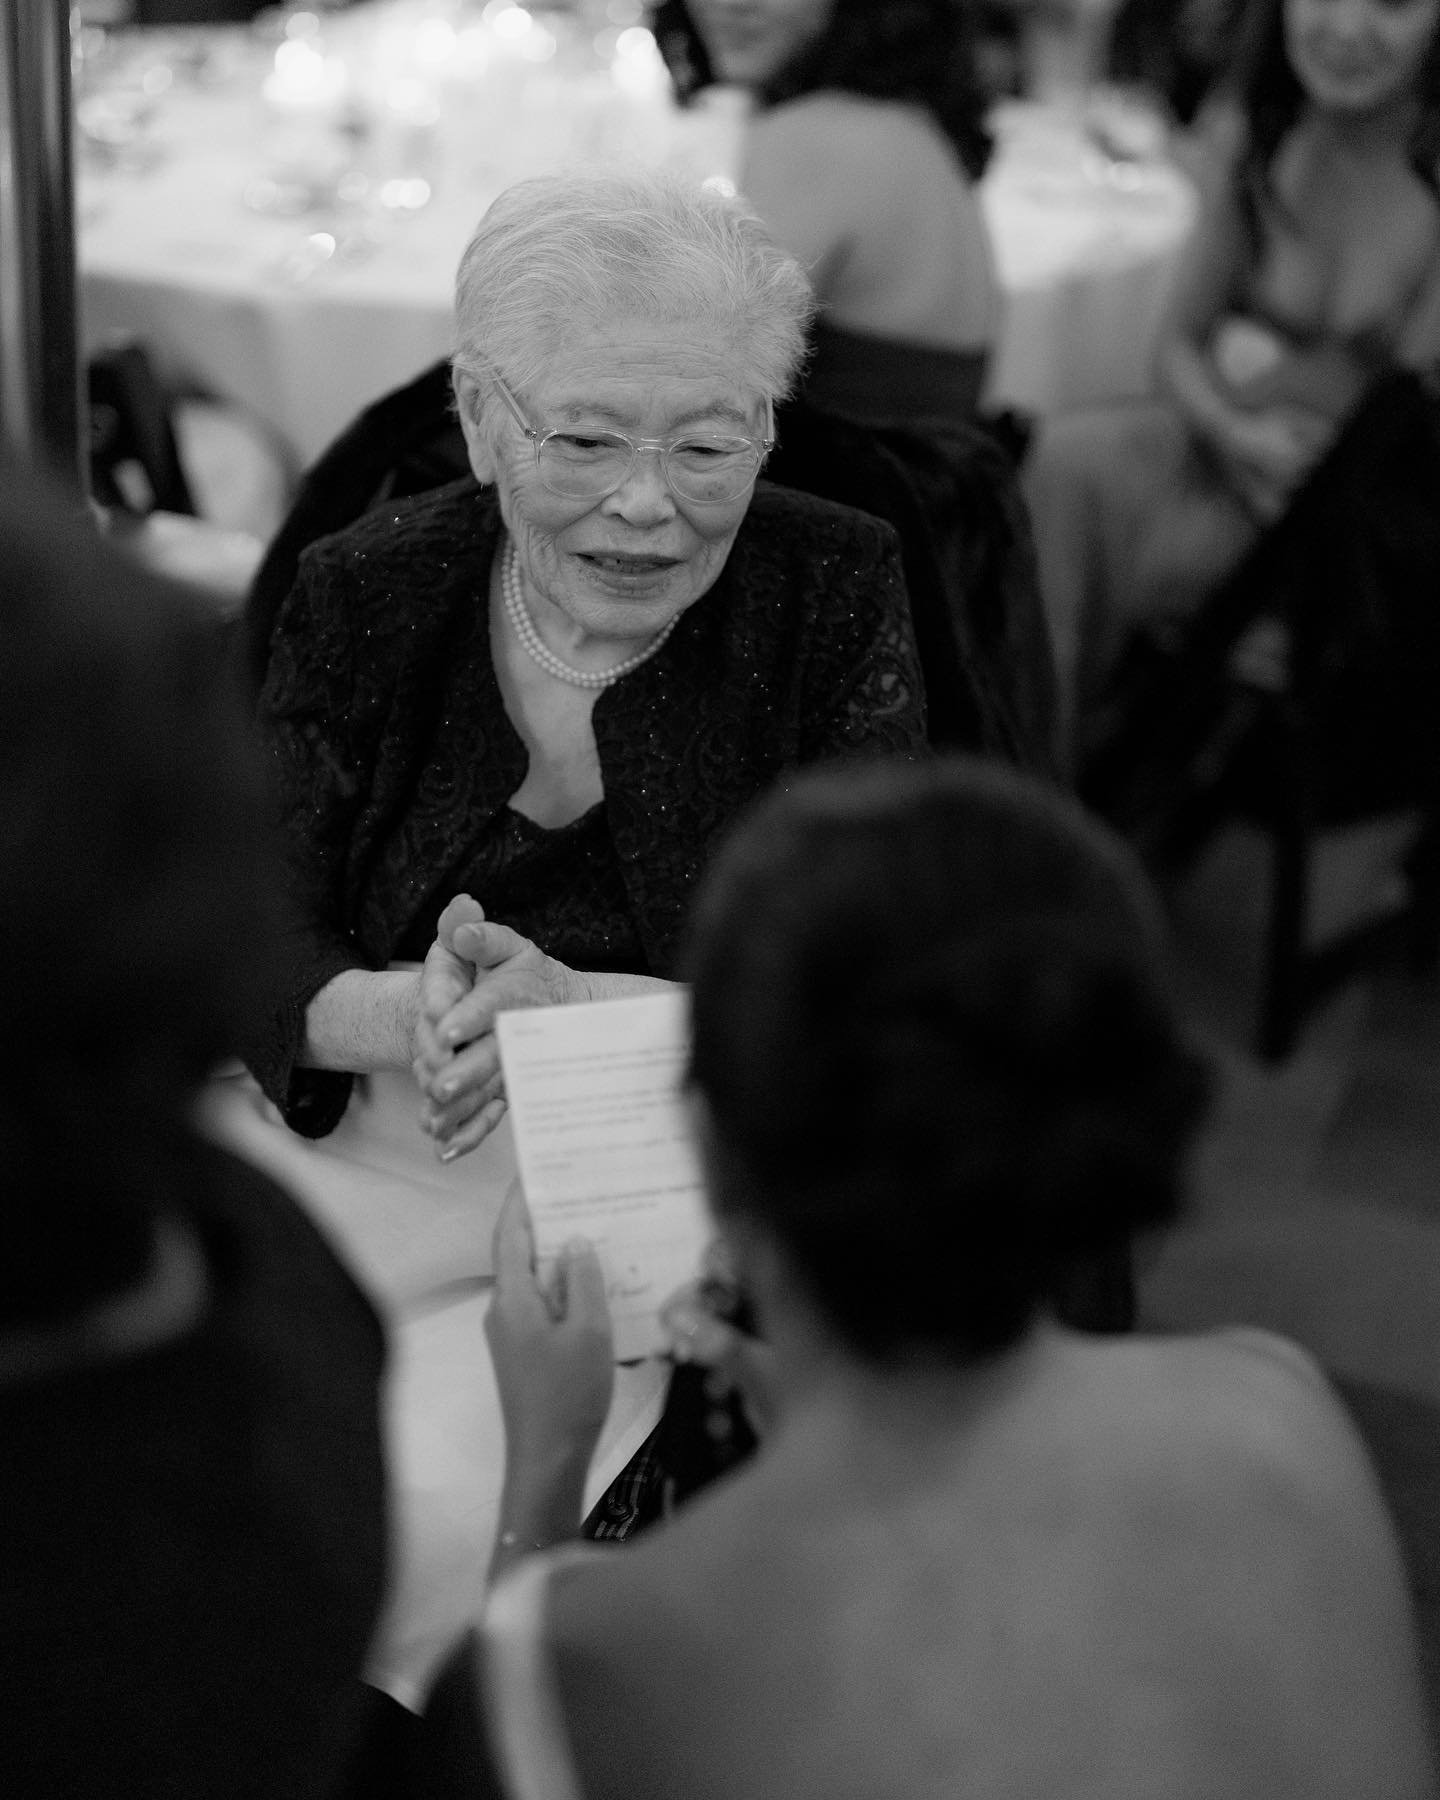 One of my favorite moments that we captured during Kaitlyn and Ryan&rsquo;s wedding day, Kaitlyn&rsquo;s speech to her 92 year old Bachan (grandma). Kaitlyn&rsquo;s main goal for her wedding day was to be completely surrounded by the friends and fami